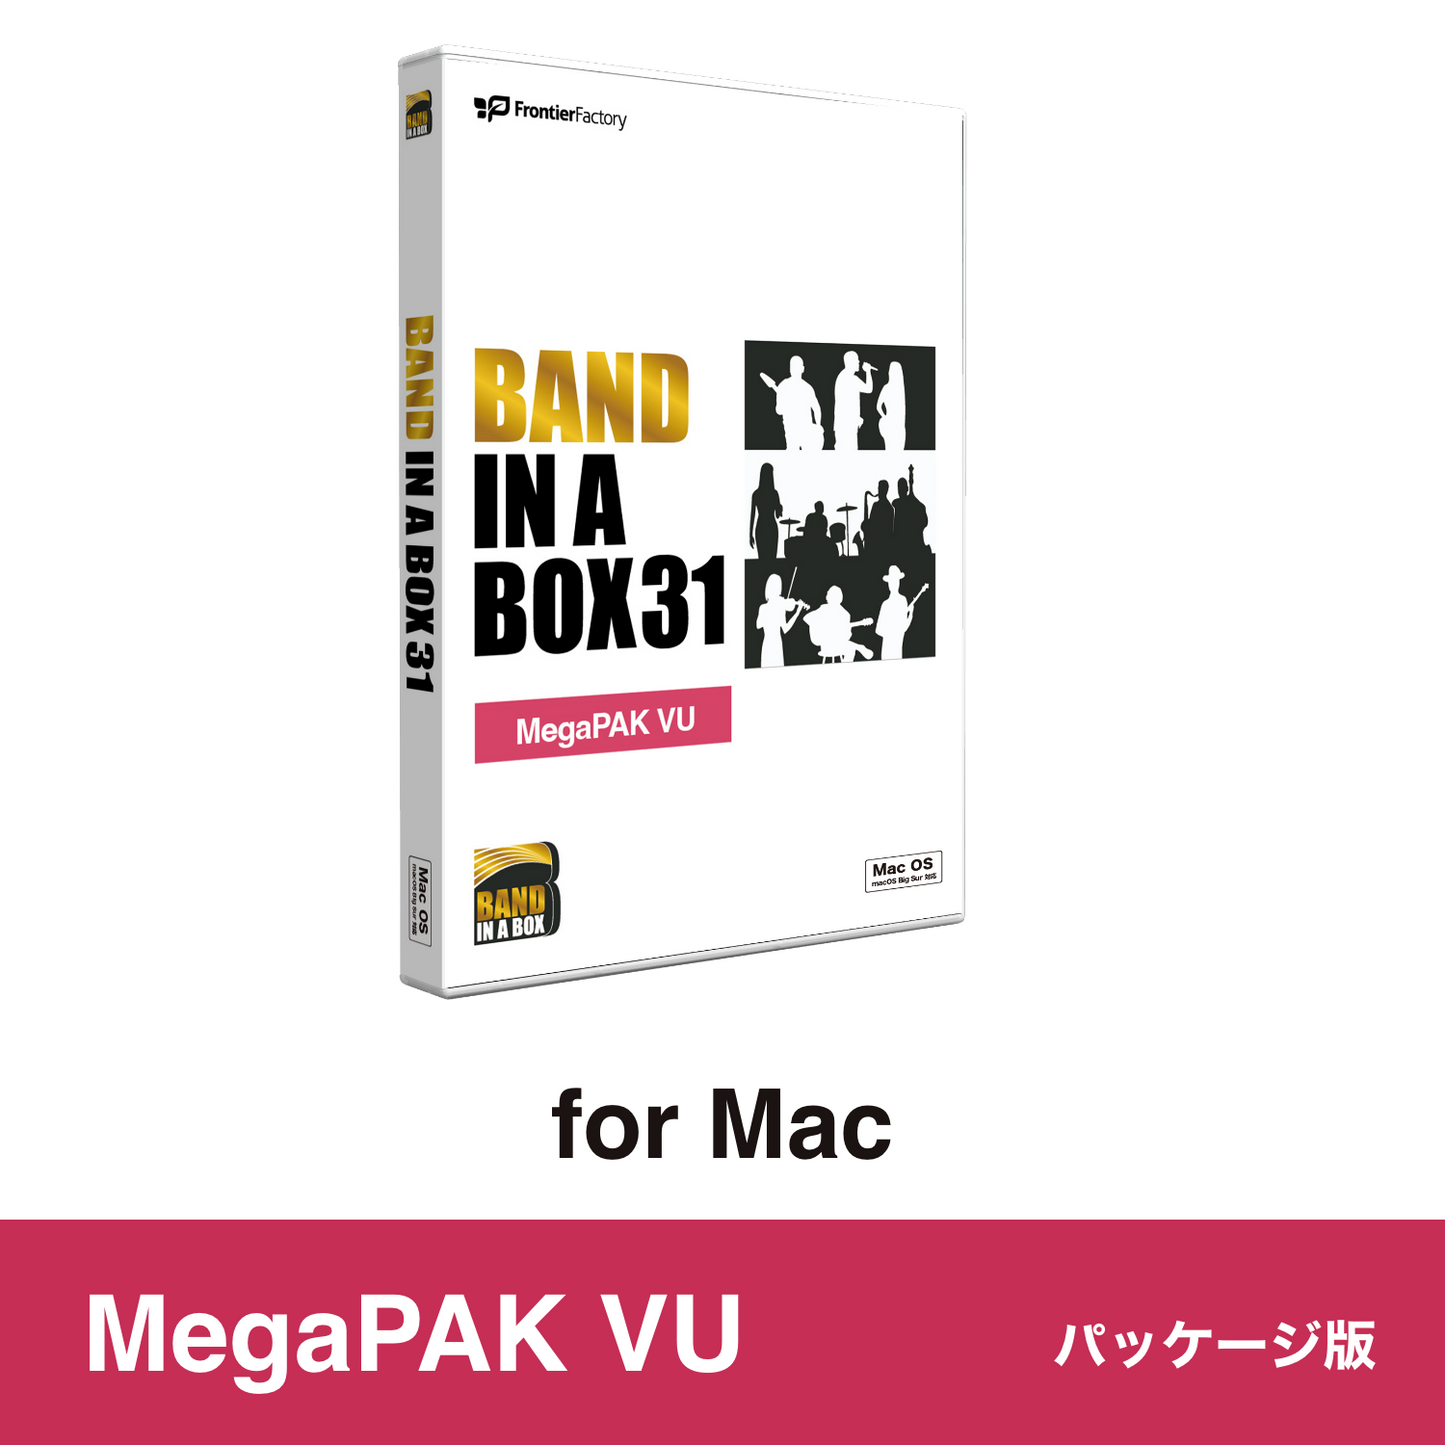 Band-in-a-Box 31 for Mac バージョンアップ【パッケージ版】